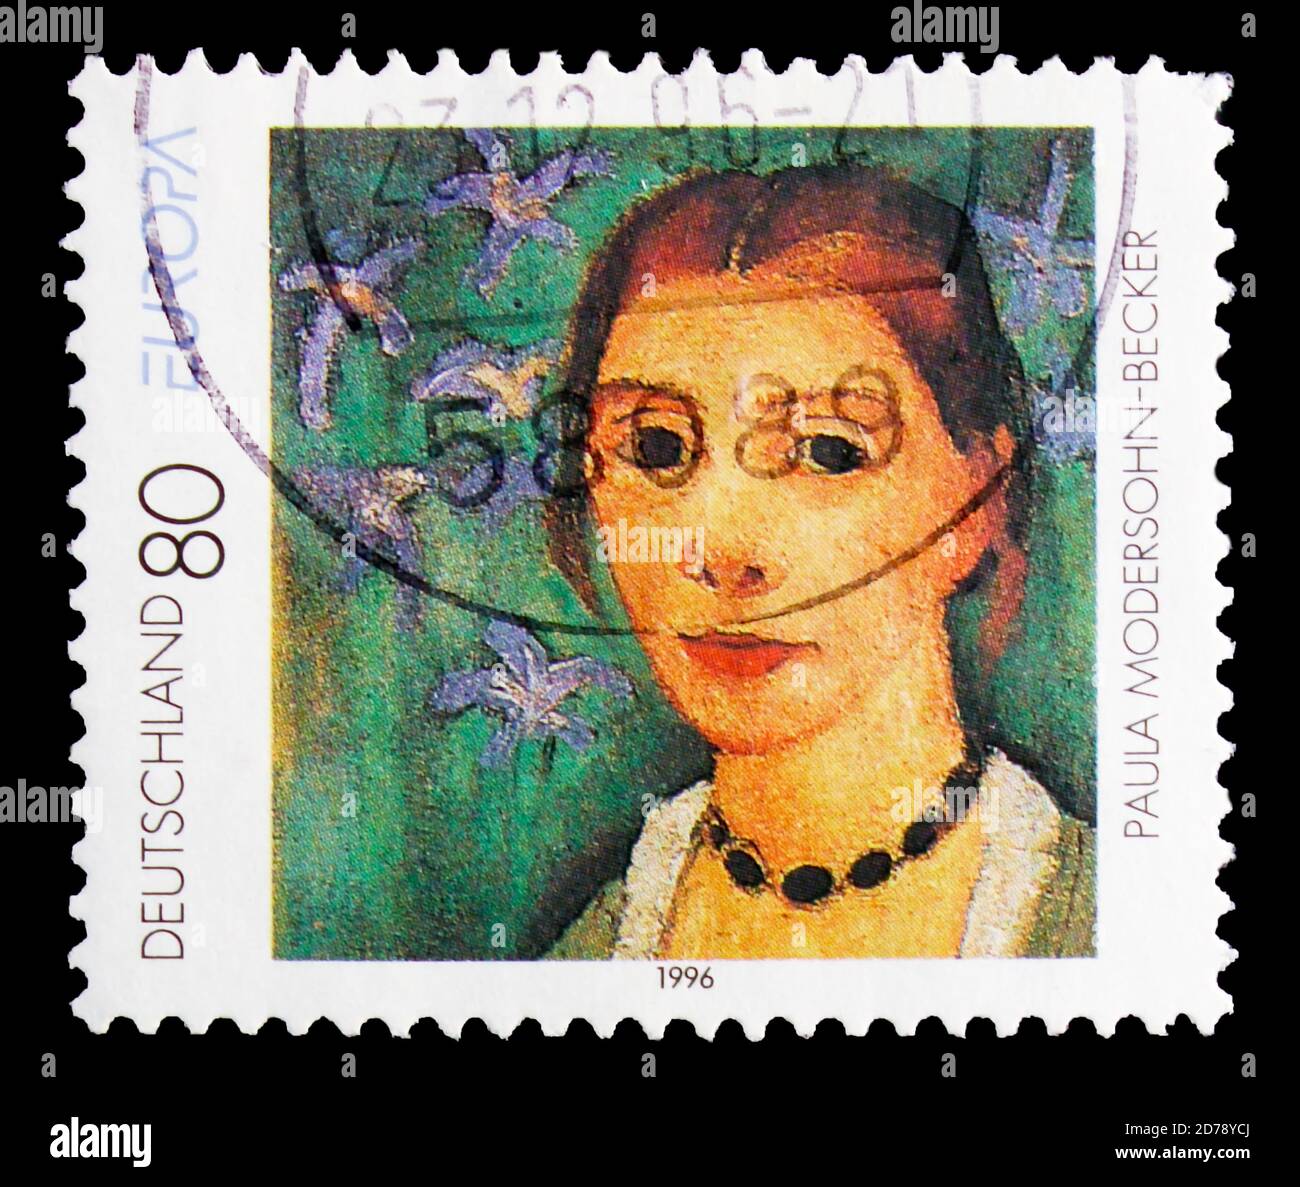 MOSCOW, RUSSIA - OCTOBER 3, 2017: A stamp printed in Germany Federal Republic shows Self-portrait by Paula Modersohn-Becker (1876-1907), Europa (C.E.P Stock Photo